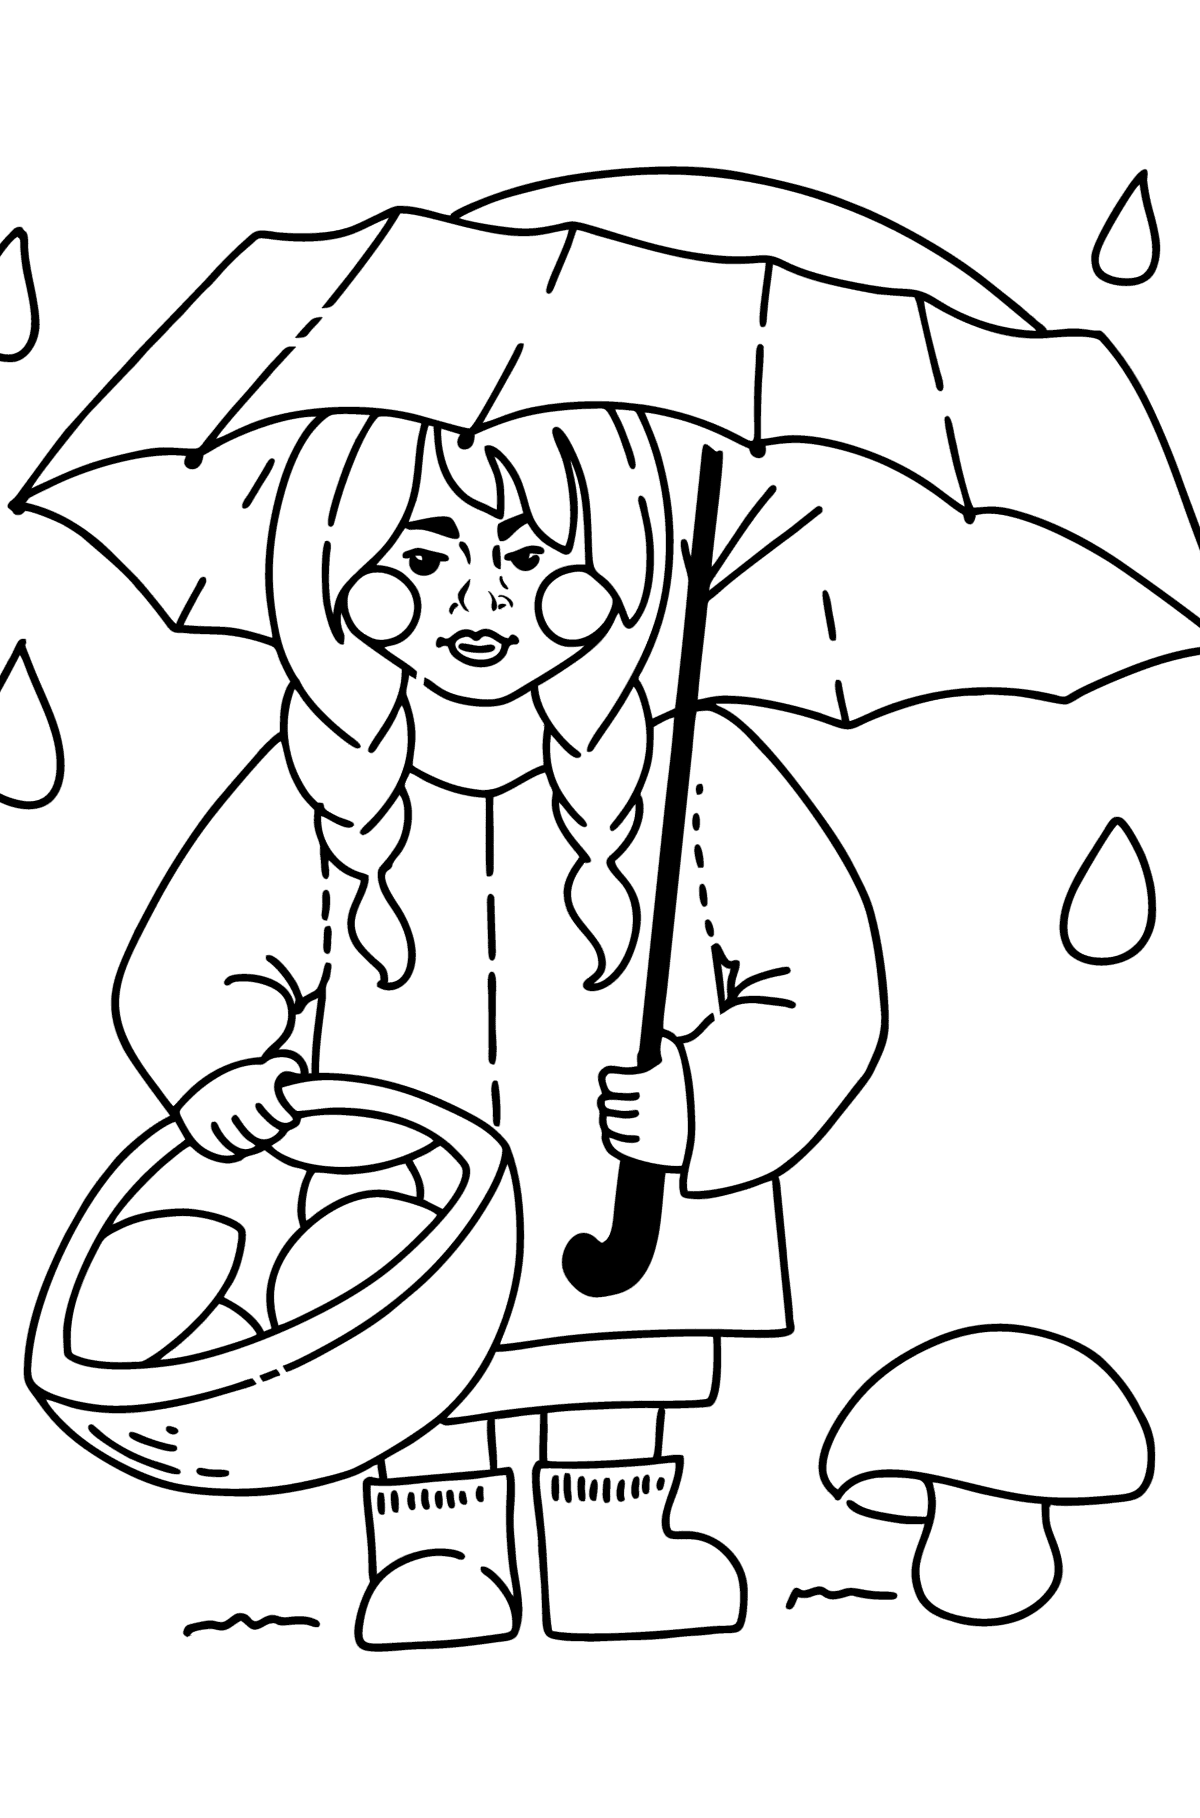 Coloring page - Girl picking mushrooms - Coloring Pages for Kids